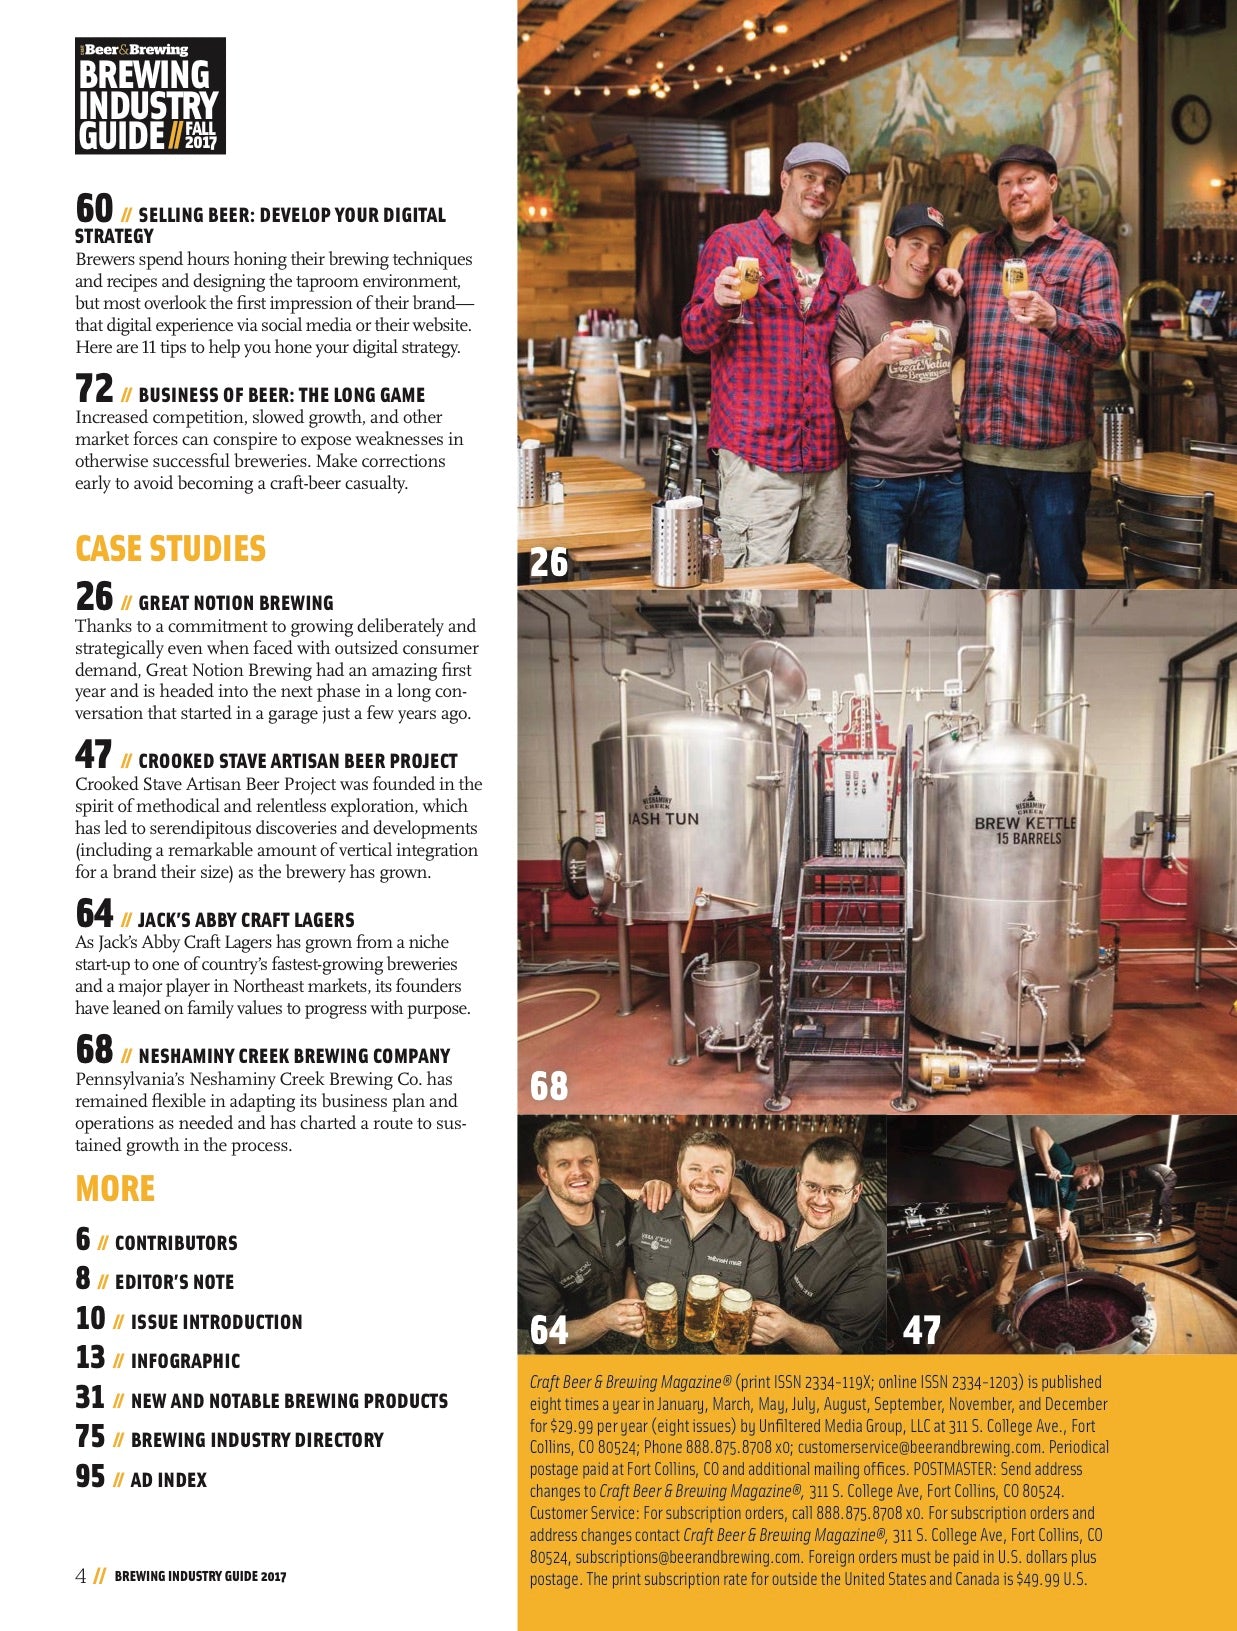 Brewing Industry Guide Fall 2017 - Craft Beer & Brewing